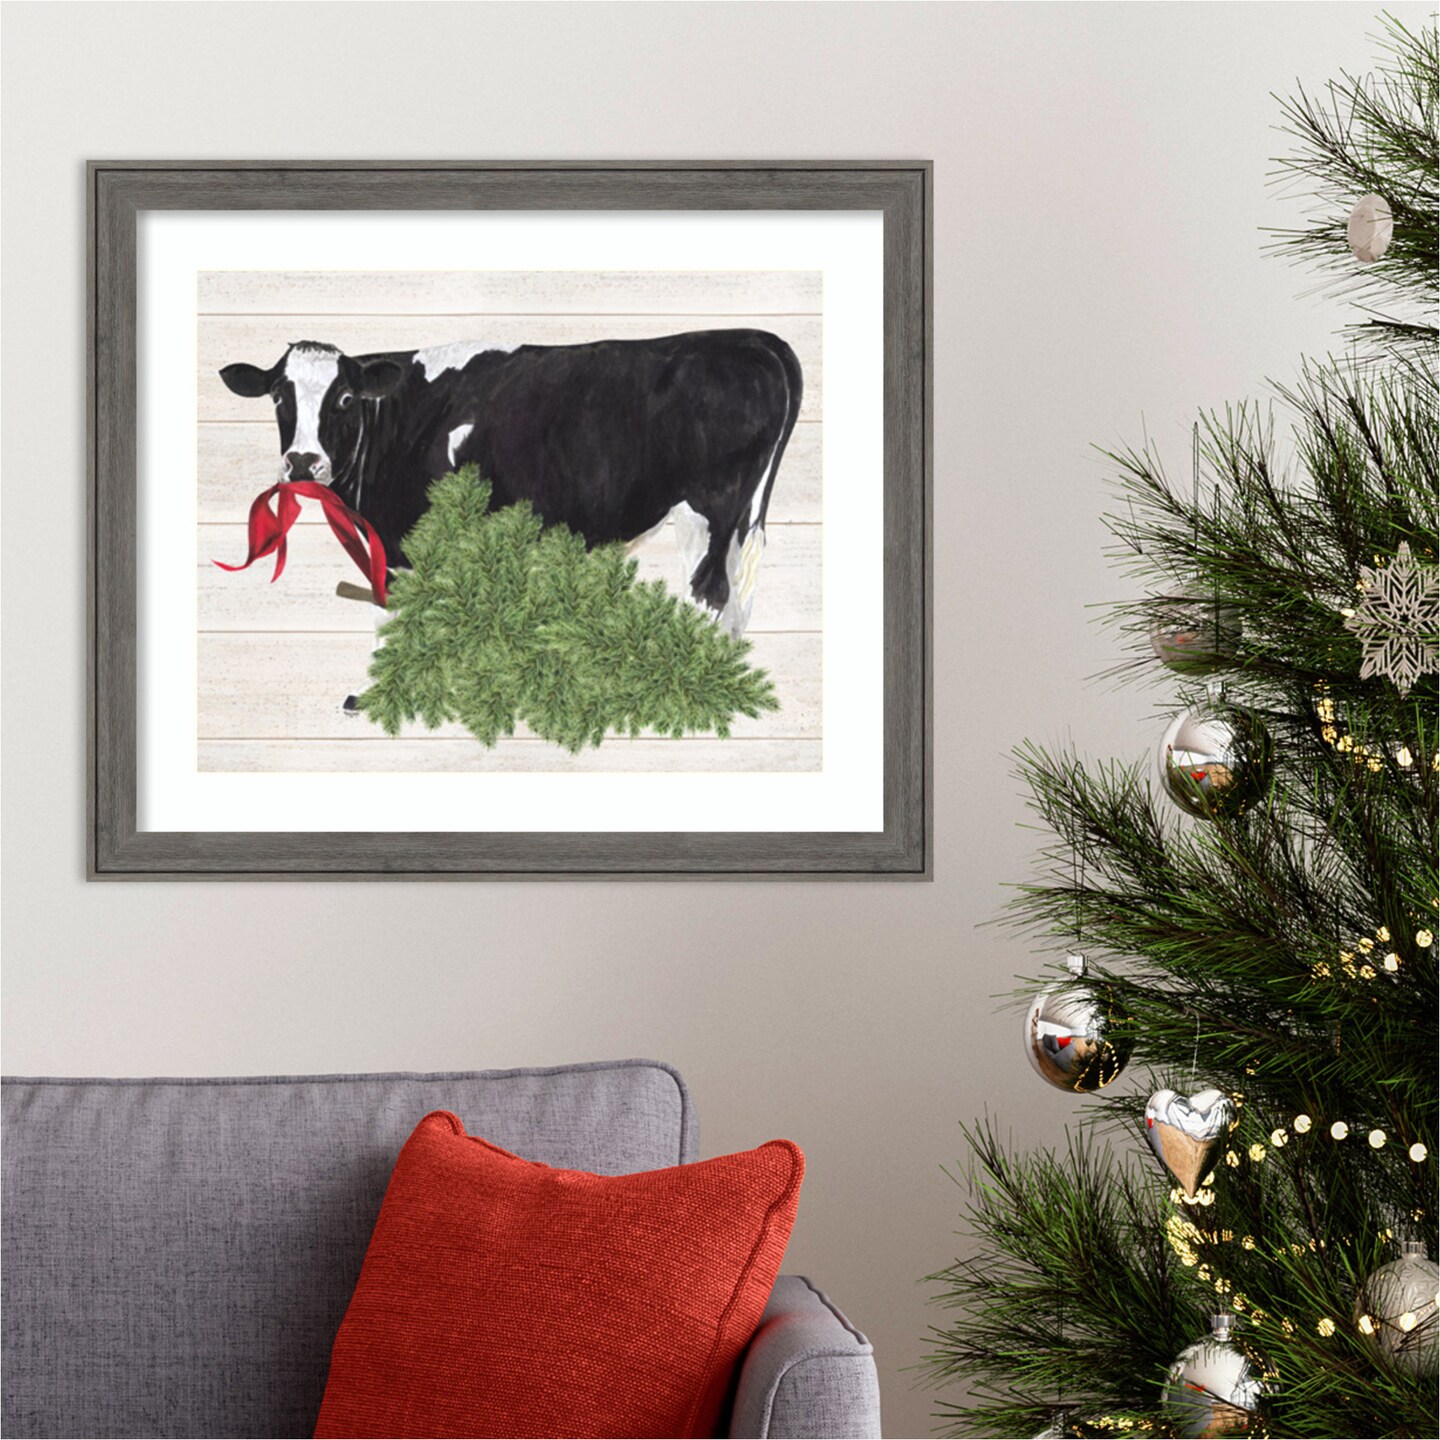 Christmas on the Farm II-Cow with Tree by Tara Reed Wood Framed Wall Art Print 27 in. W x 23 in. H